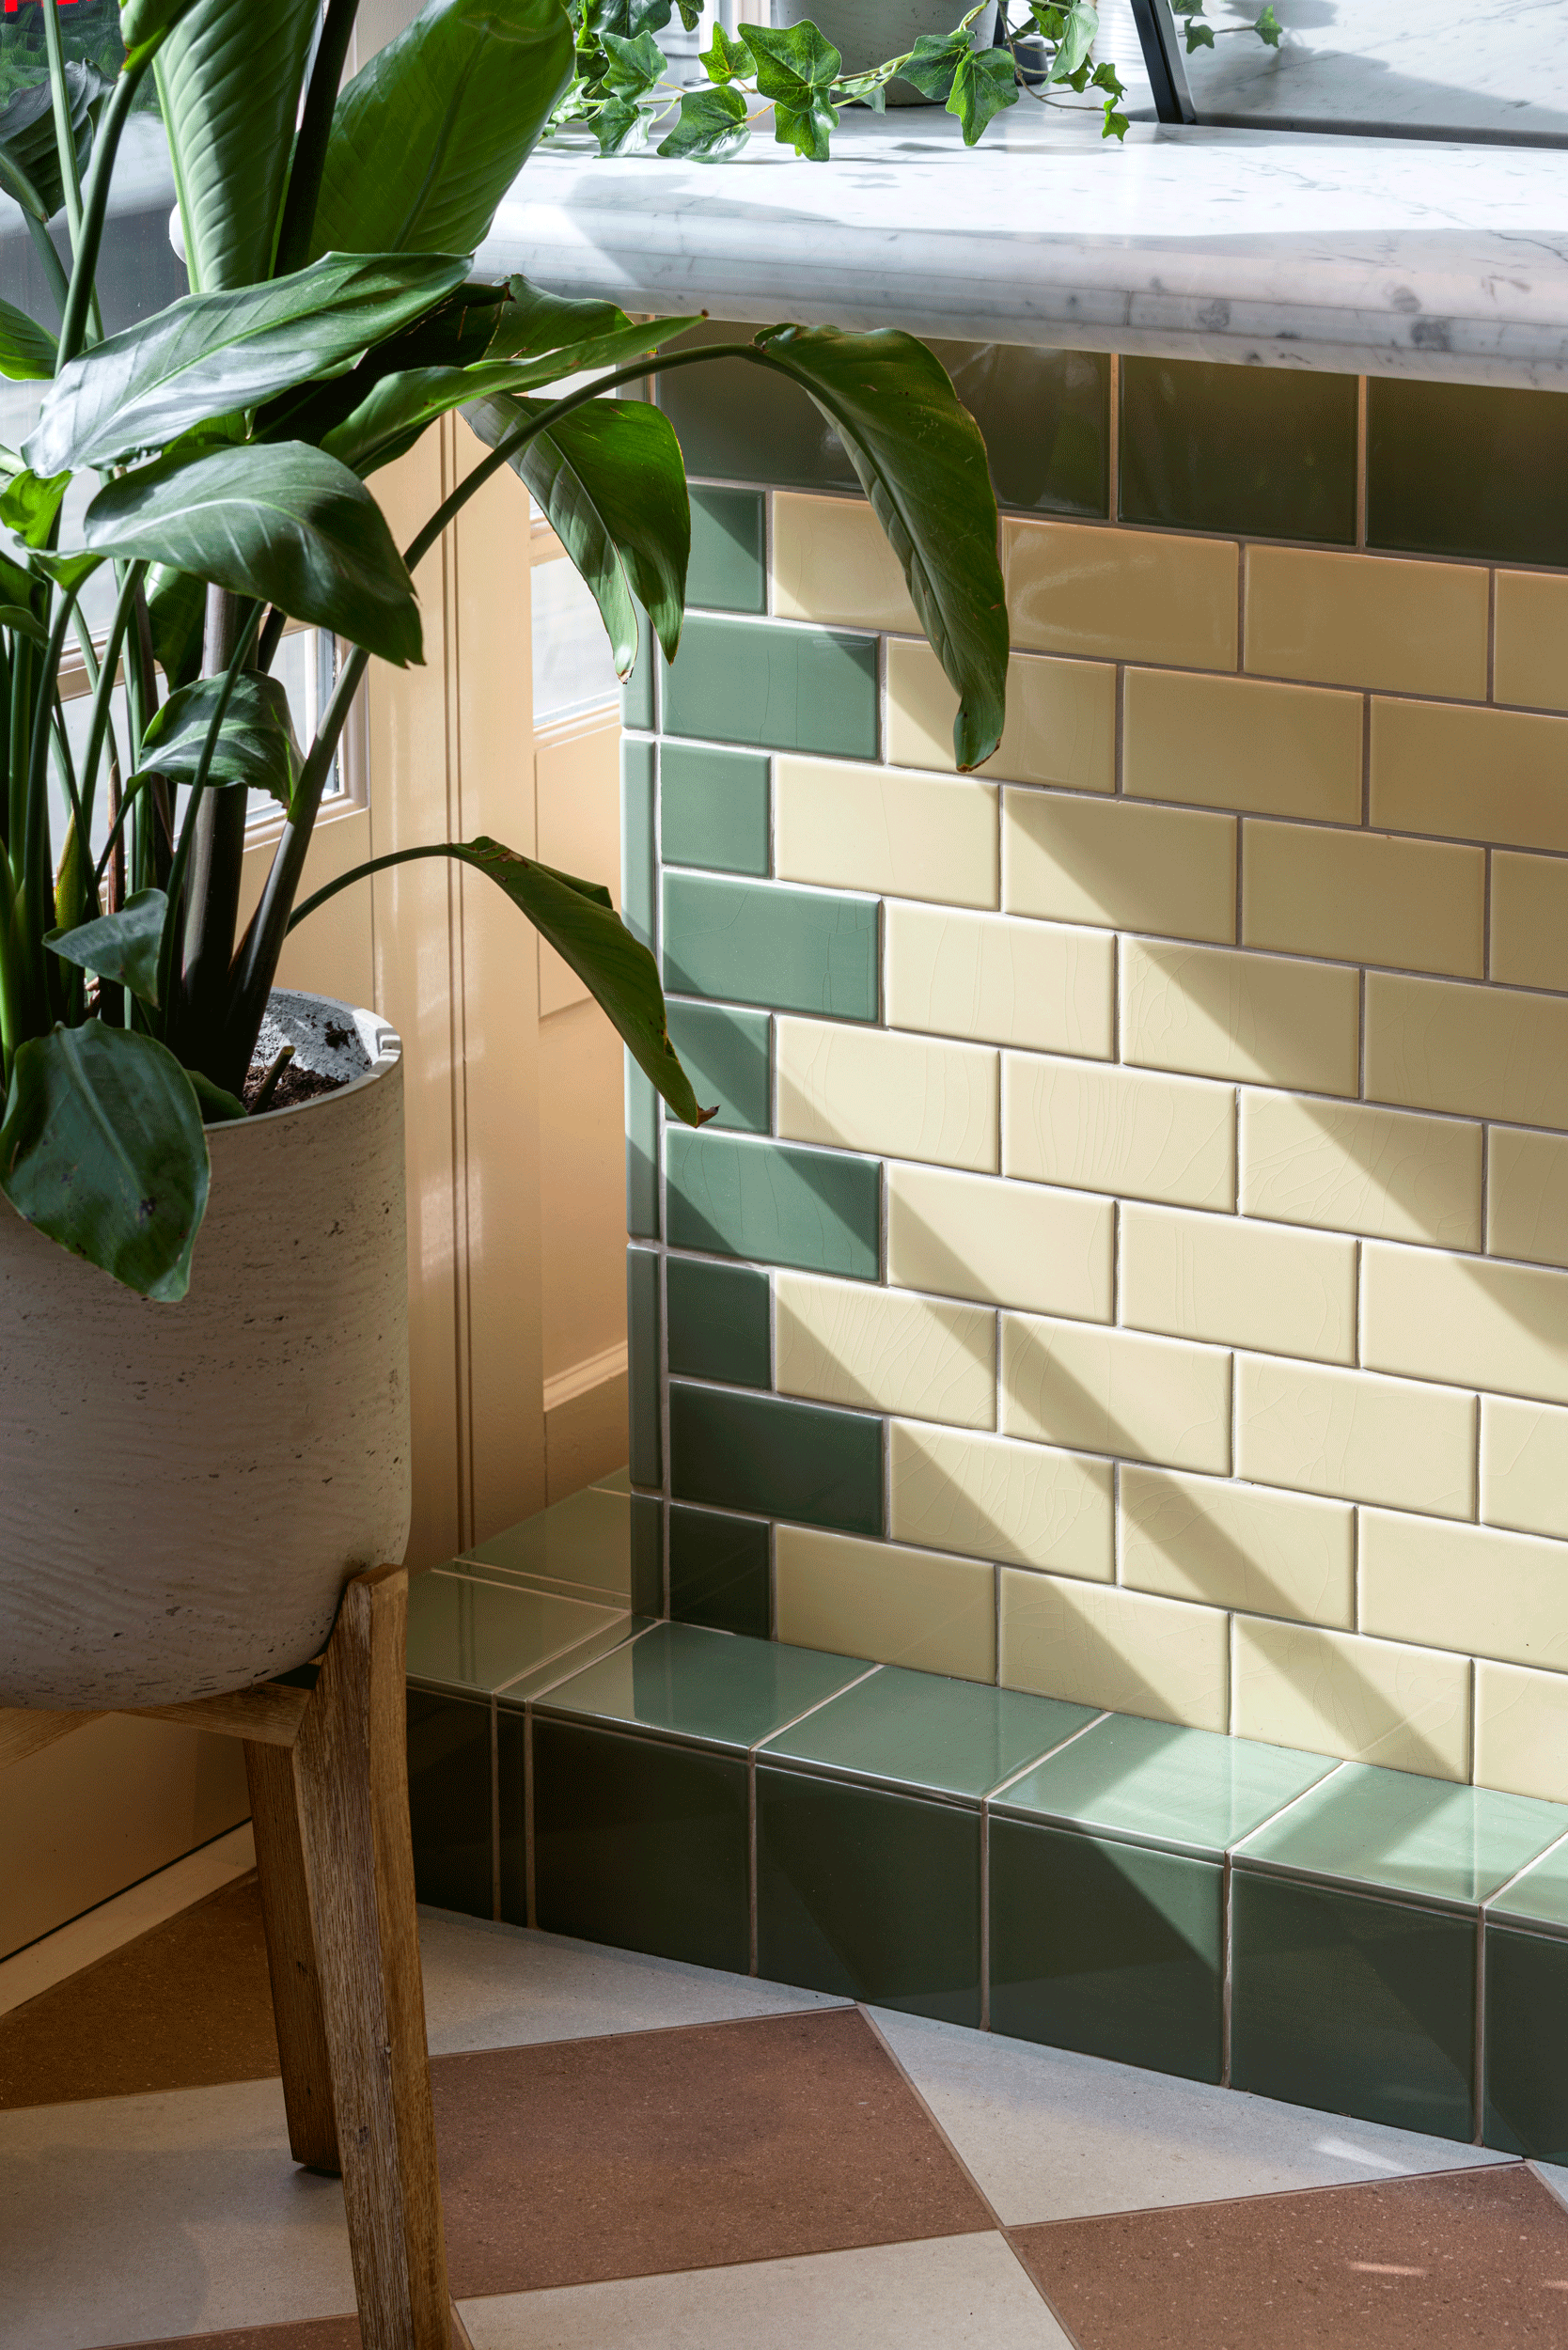 victorian tiles bar detail and plant